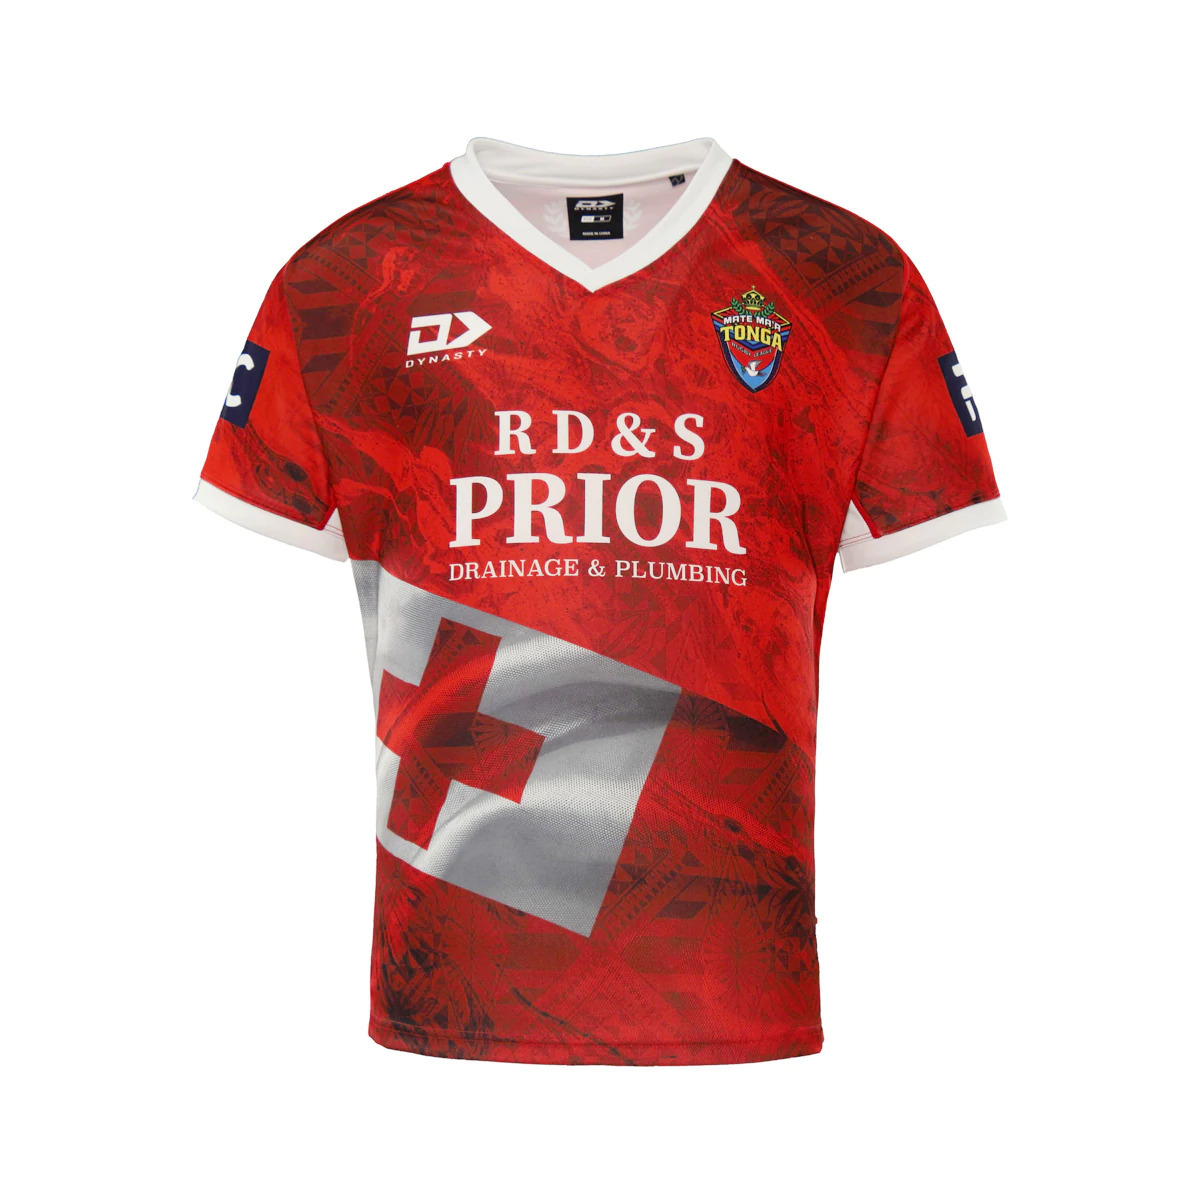 S-3XL NEW 2019-20 Tonga Home Rugby jerseys T-shirt man Size 